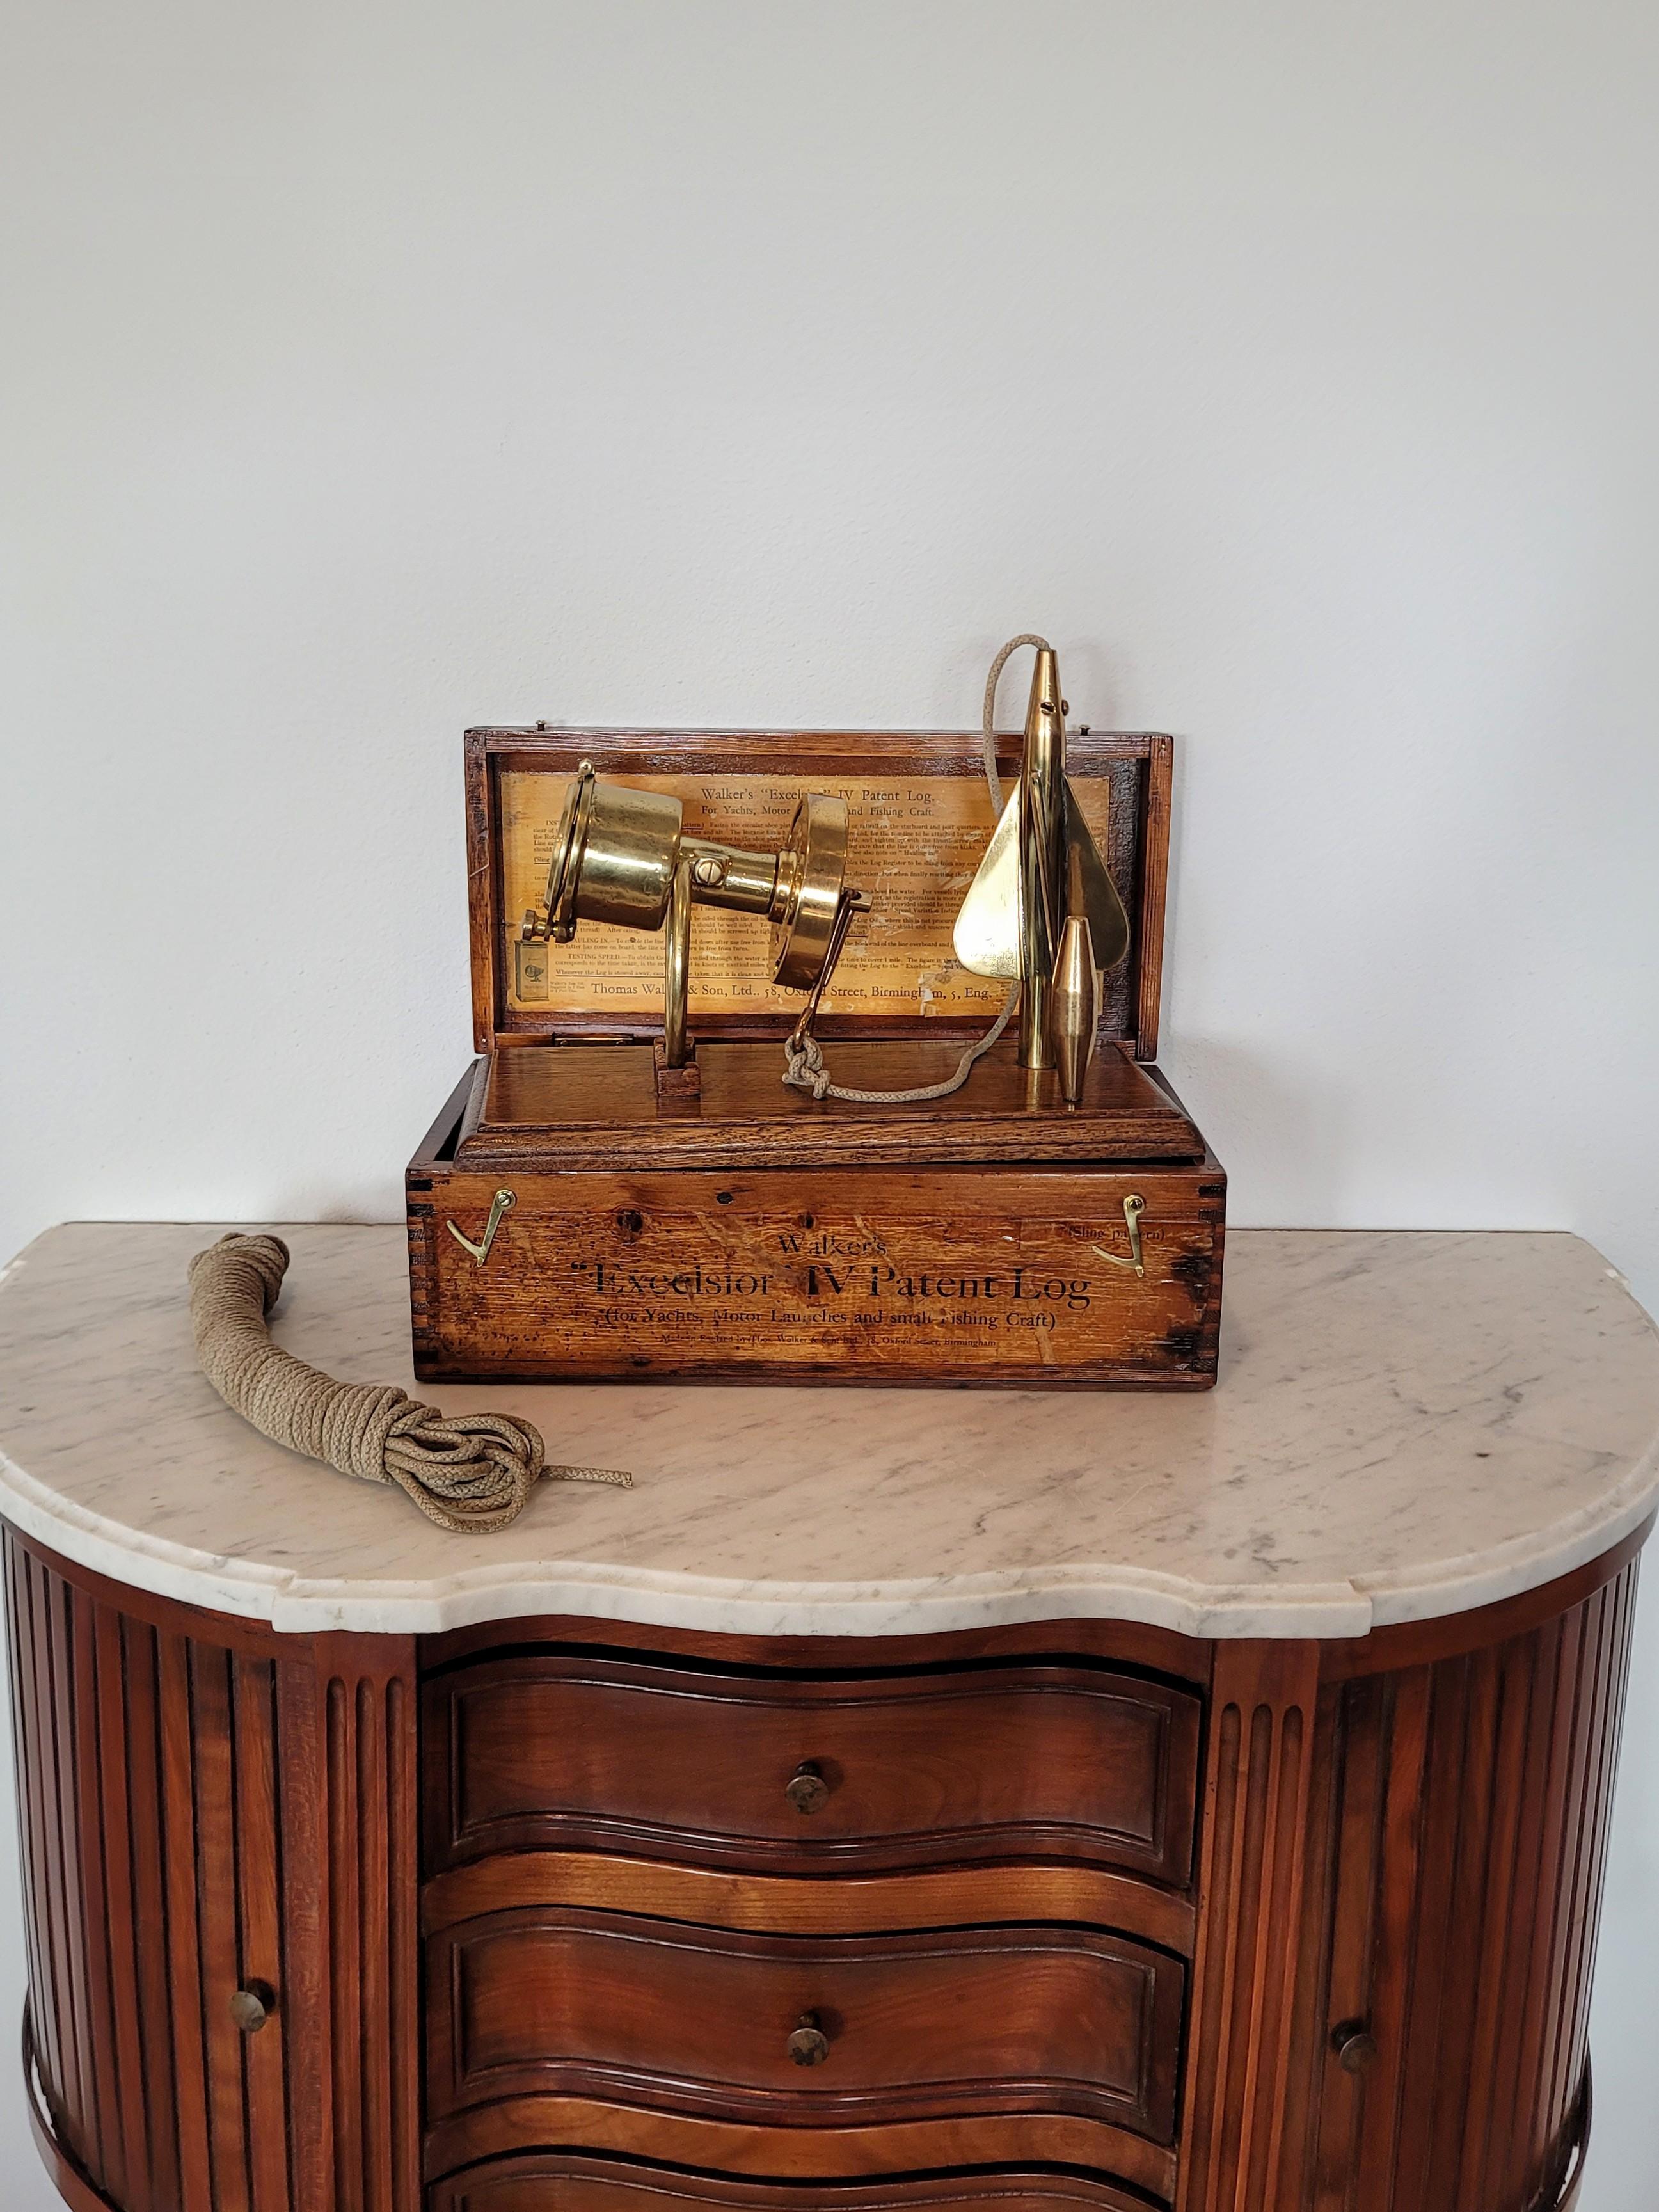 A highly collectible and sought-after antique Walker's Excelsior IV Patent Log, circa 1920s/1930s, signed solid brass Nautical outrigger with register, flywheel rotator, and accessories, stored in the original varnished pine wood box, includes later